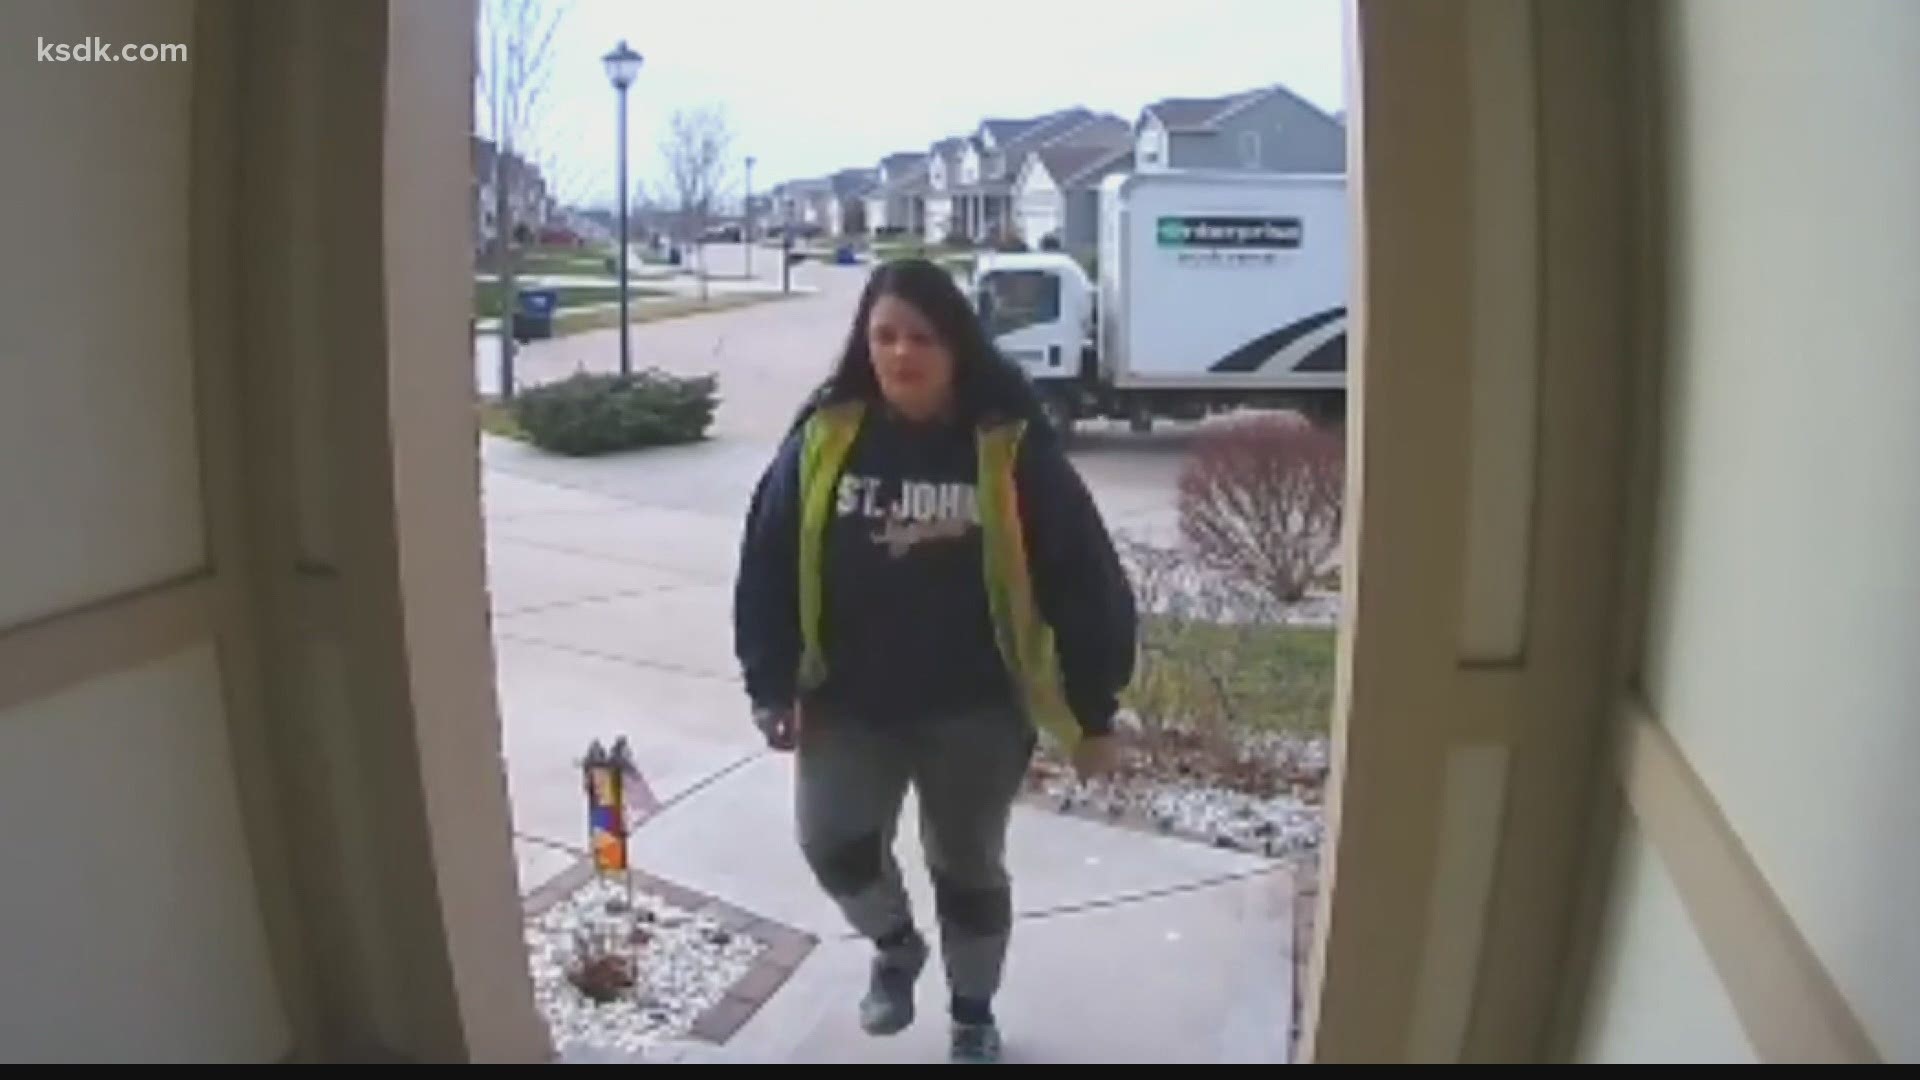 Police say Alyssa George, 22, stole about 20 packages from porches along her Amazon delivery route